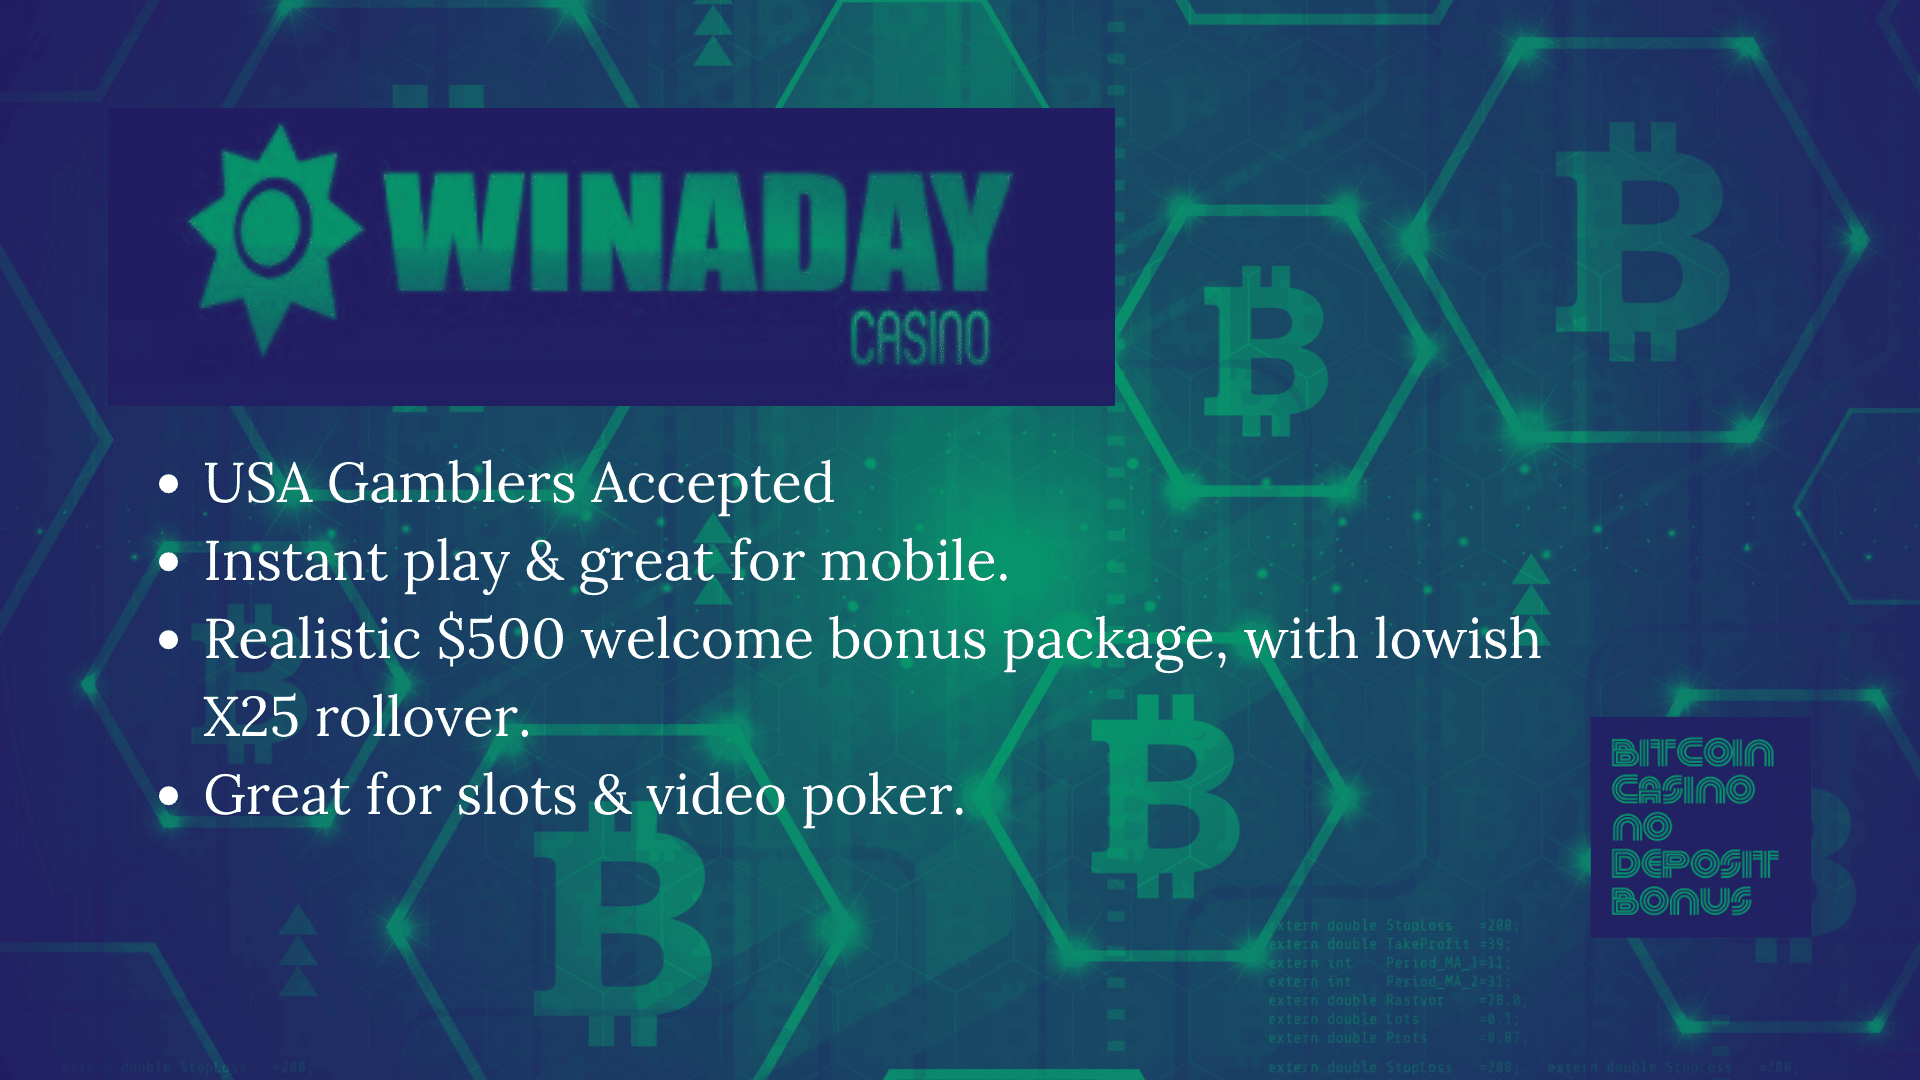 You are currently viewing Win A Day Casino No Deposit Bonus Codes December 2022 – Winadaycasino.eu Coupons